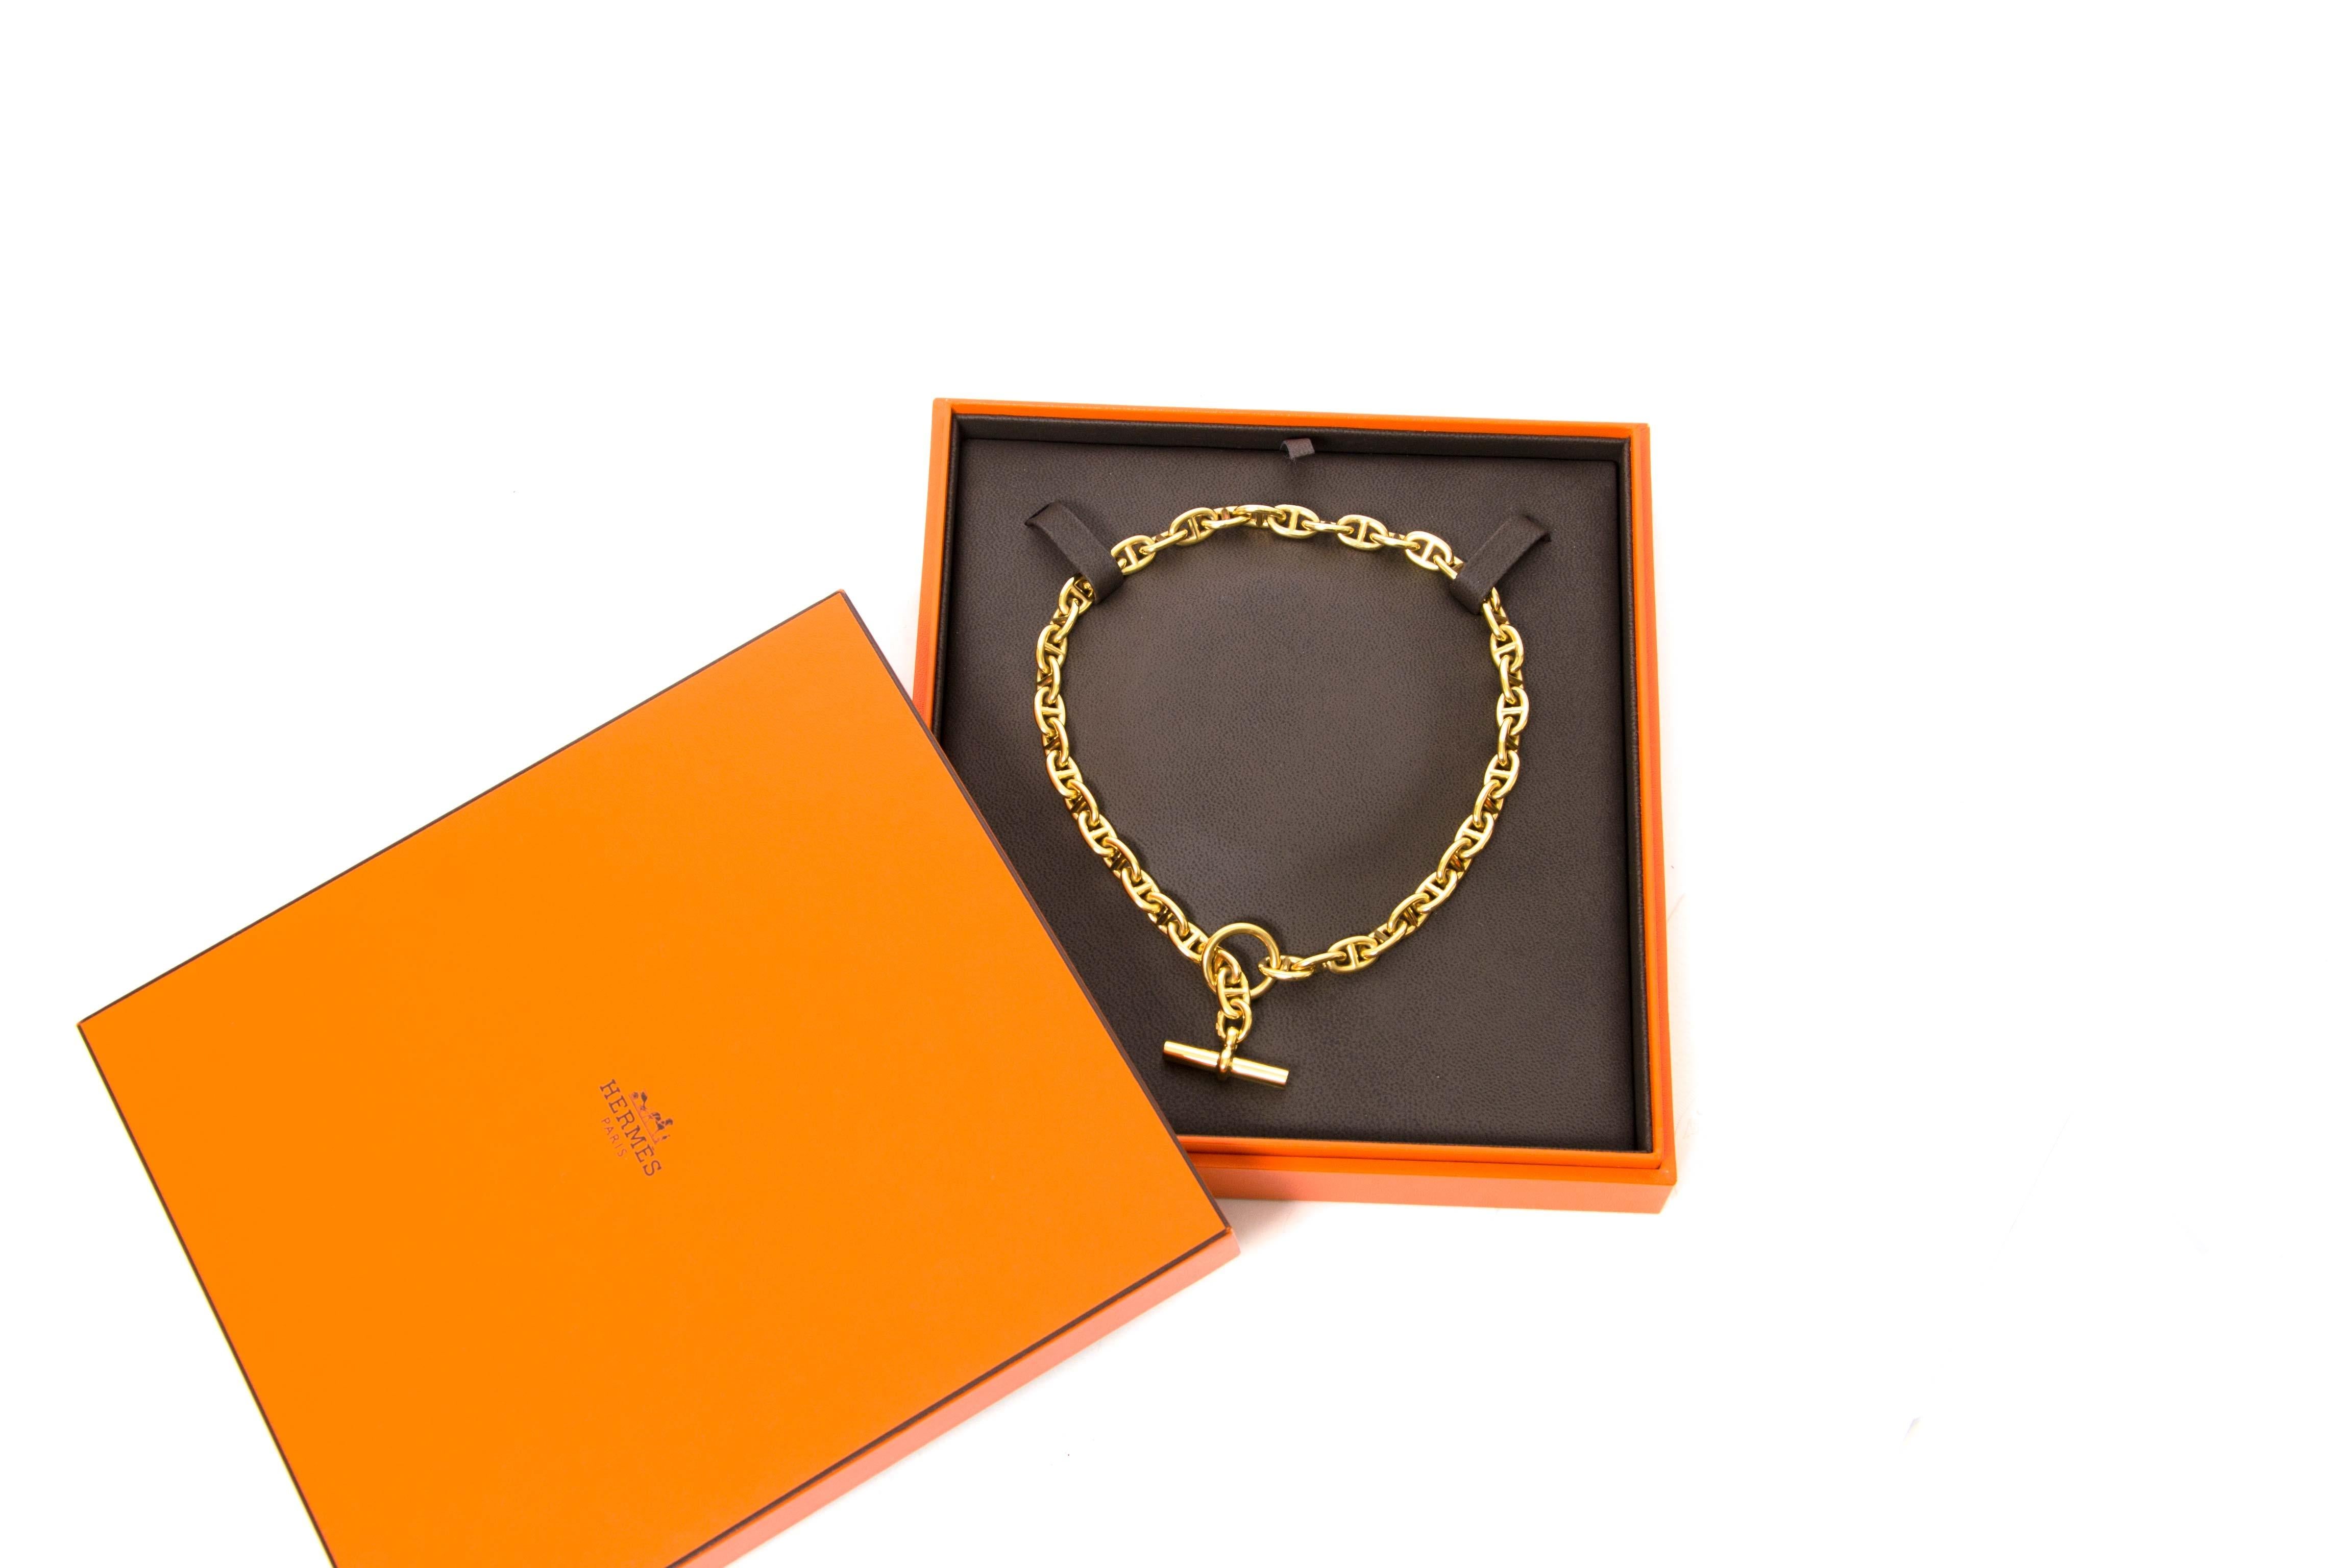 Excellent condition

Hermès Collier Chain d'Ancre PM 18K Gold

COMES WITH CERTIFICATES

The epitome of pure luxury: this divine Hermès necklace. The Chain d'Ancre is a true icon to the French designer house, and will have people stop and stare.

The